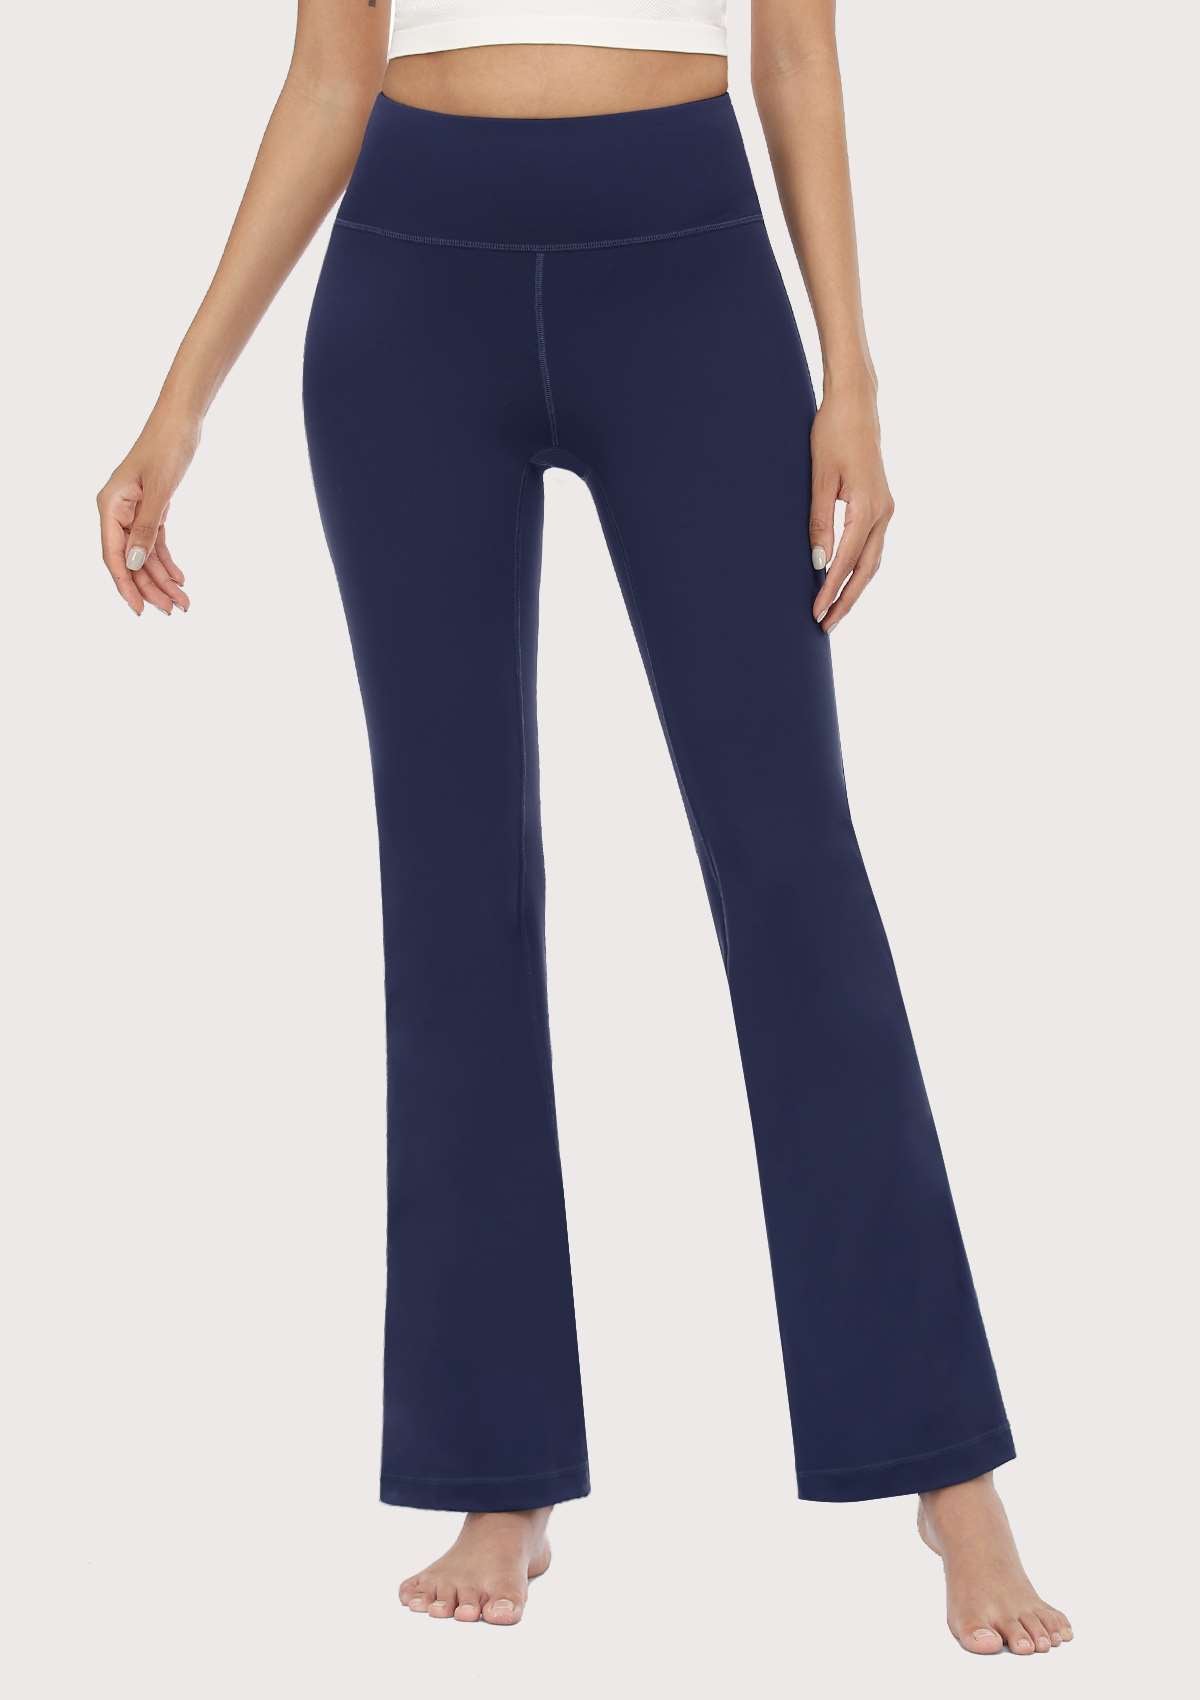 SONGFUL Smooth High Waisted Bootcut Yoga Sports Pants - S / Dark Blue